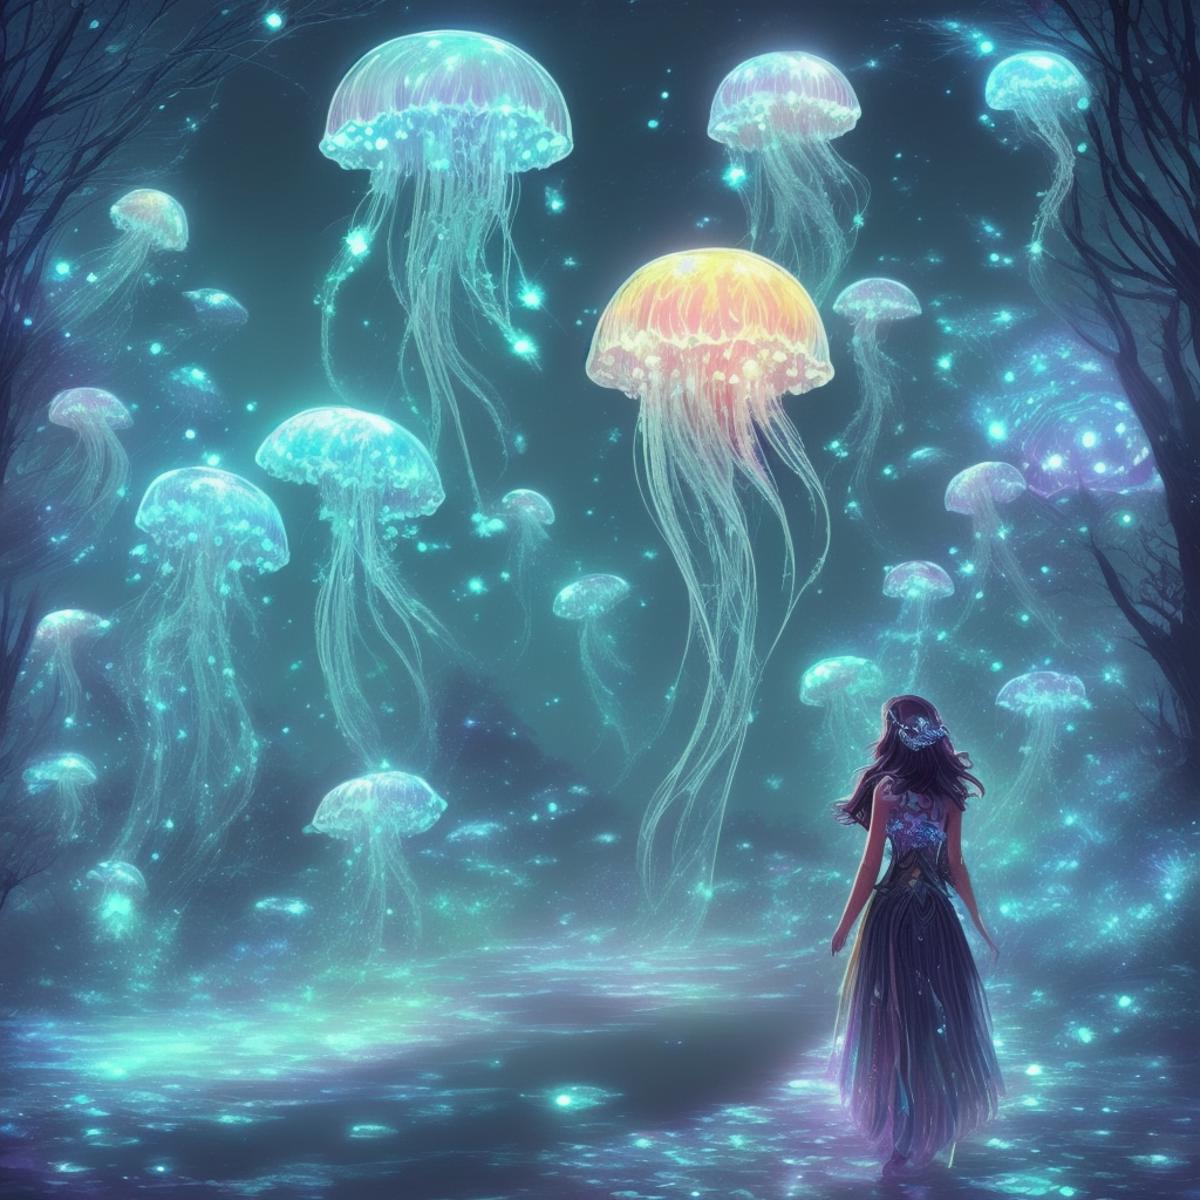 [LoRA] Jellyfish forest / 水月森 /くらげもり Concept (With dropout & noise version) image by mharleman